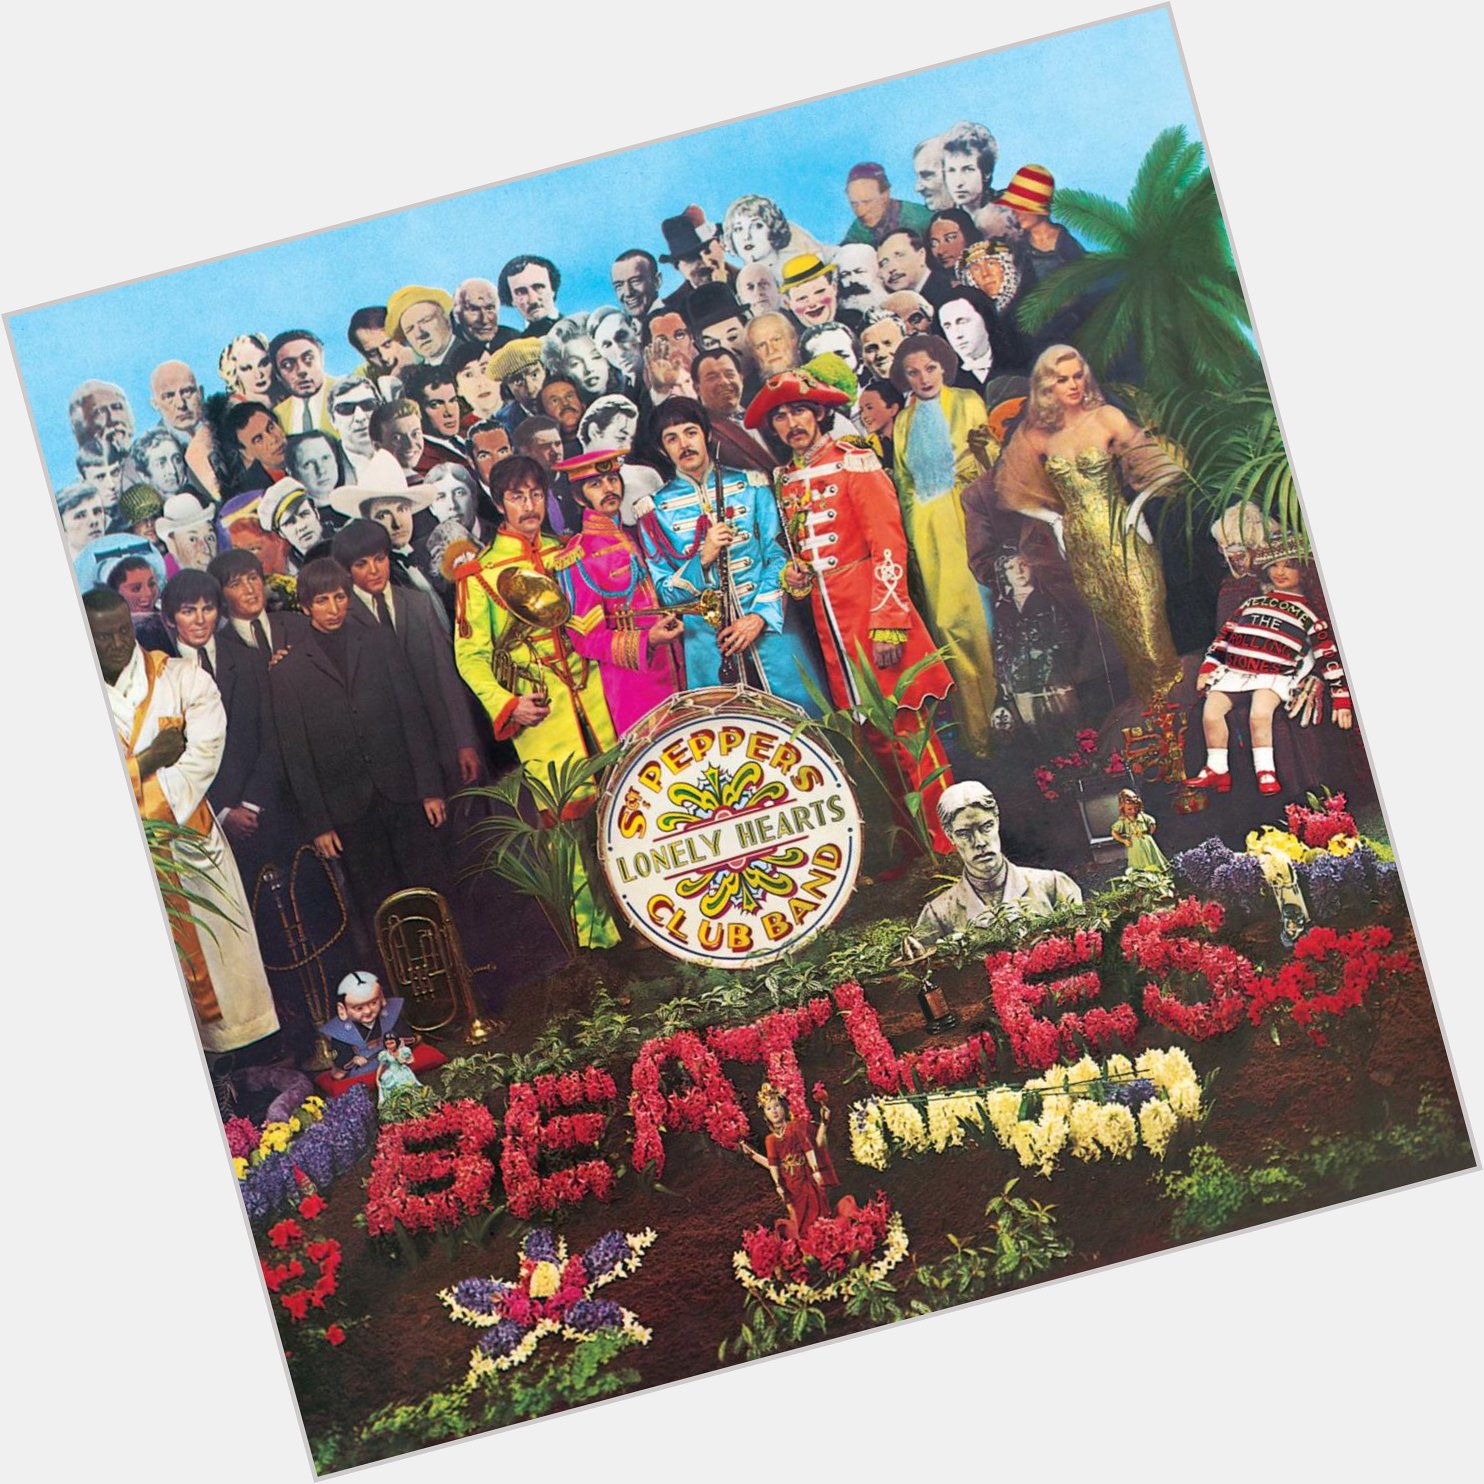 Happy Birthday artist Peter Blake, responsible for co-creating the Sgt. Pepper\s Lonely Hearts Club Band album cover 